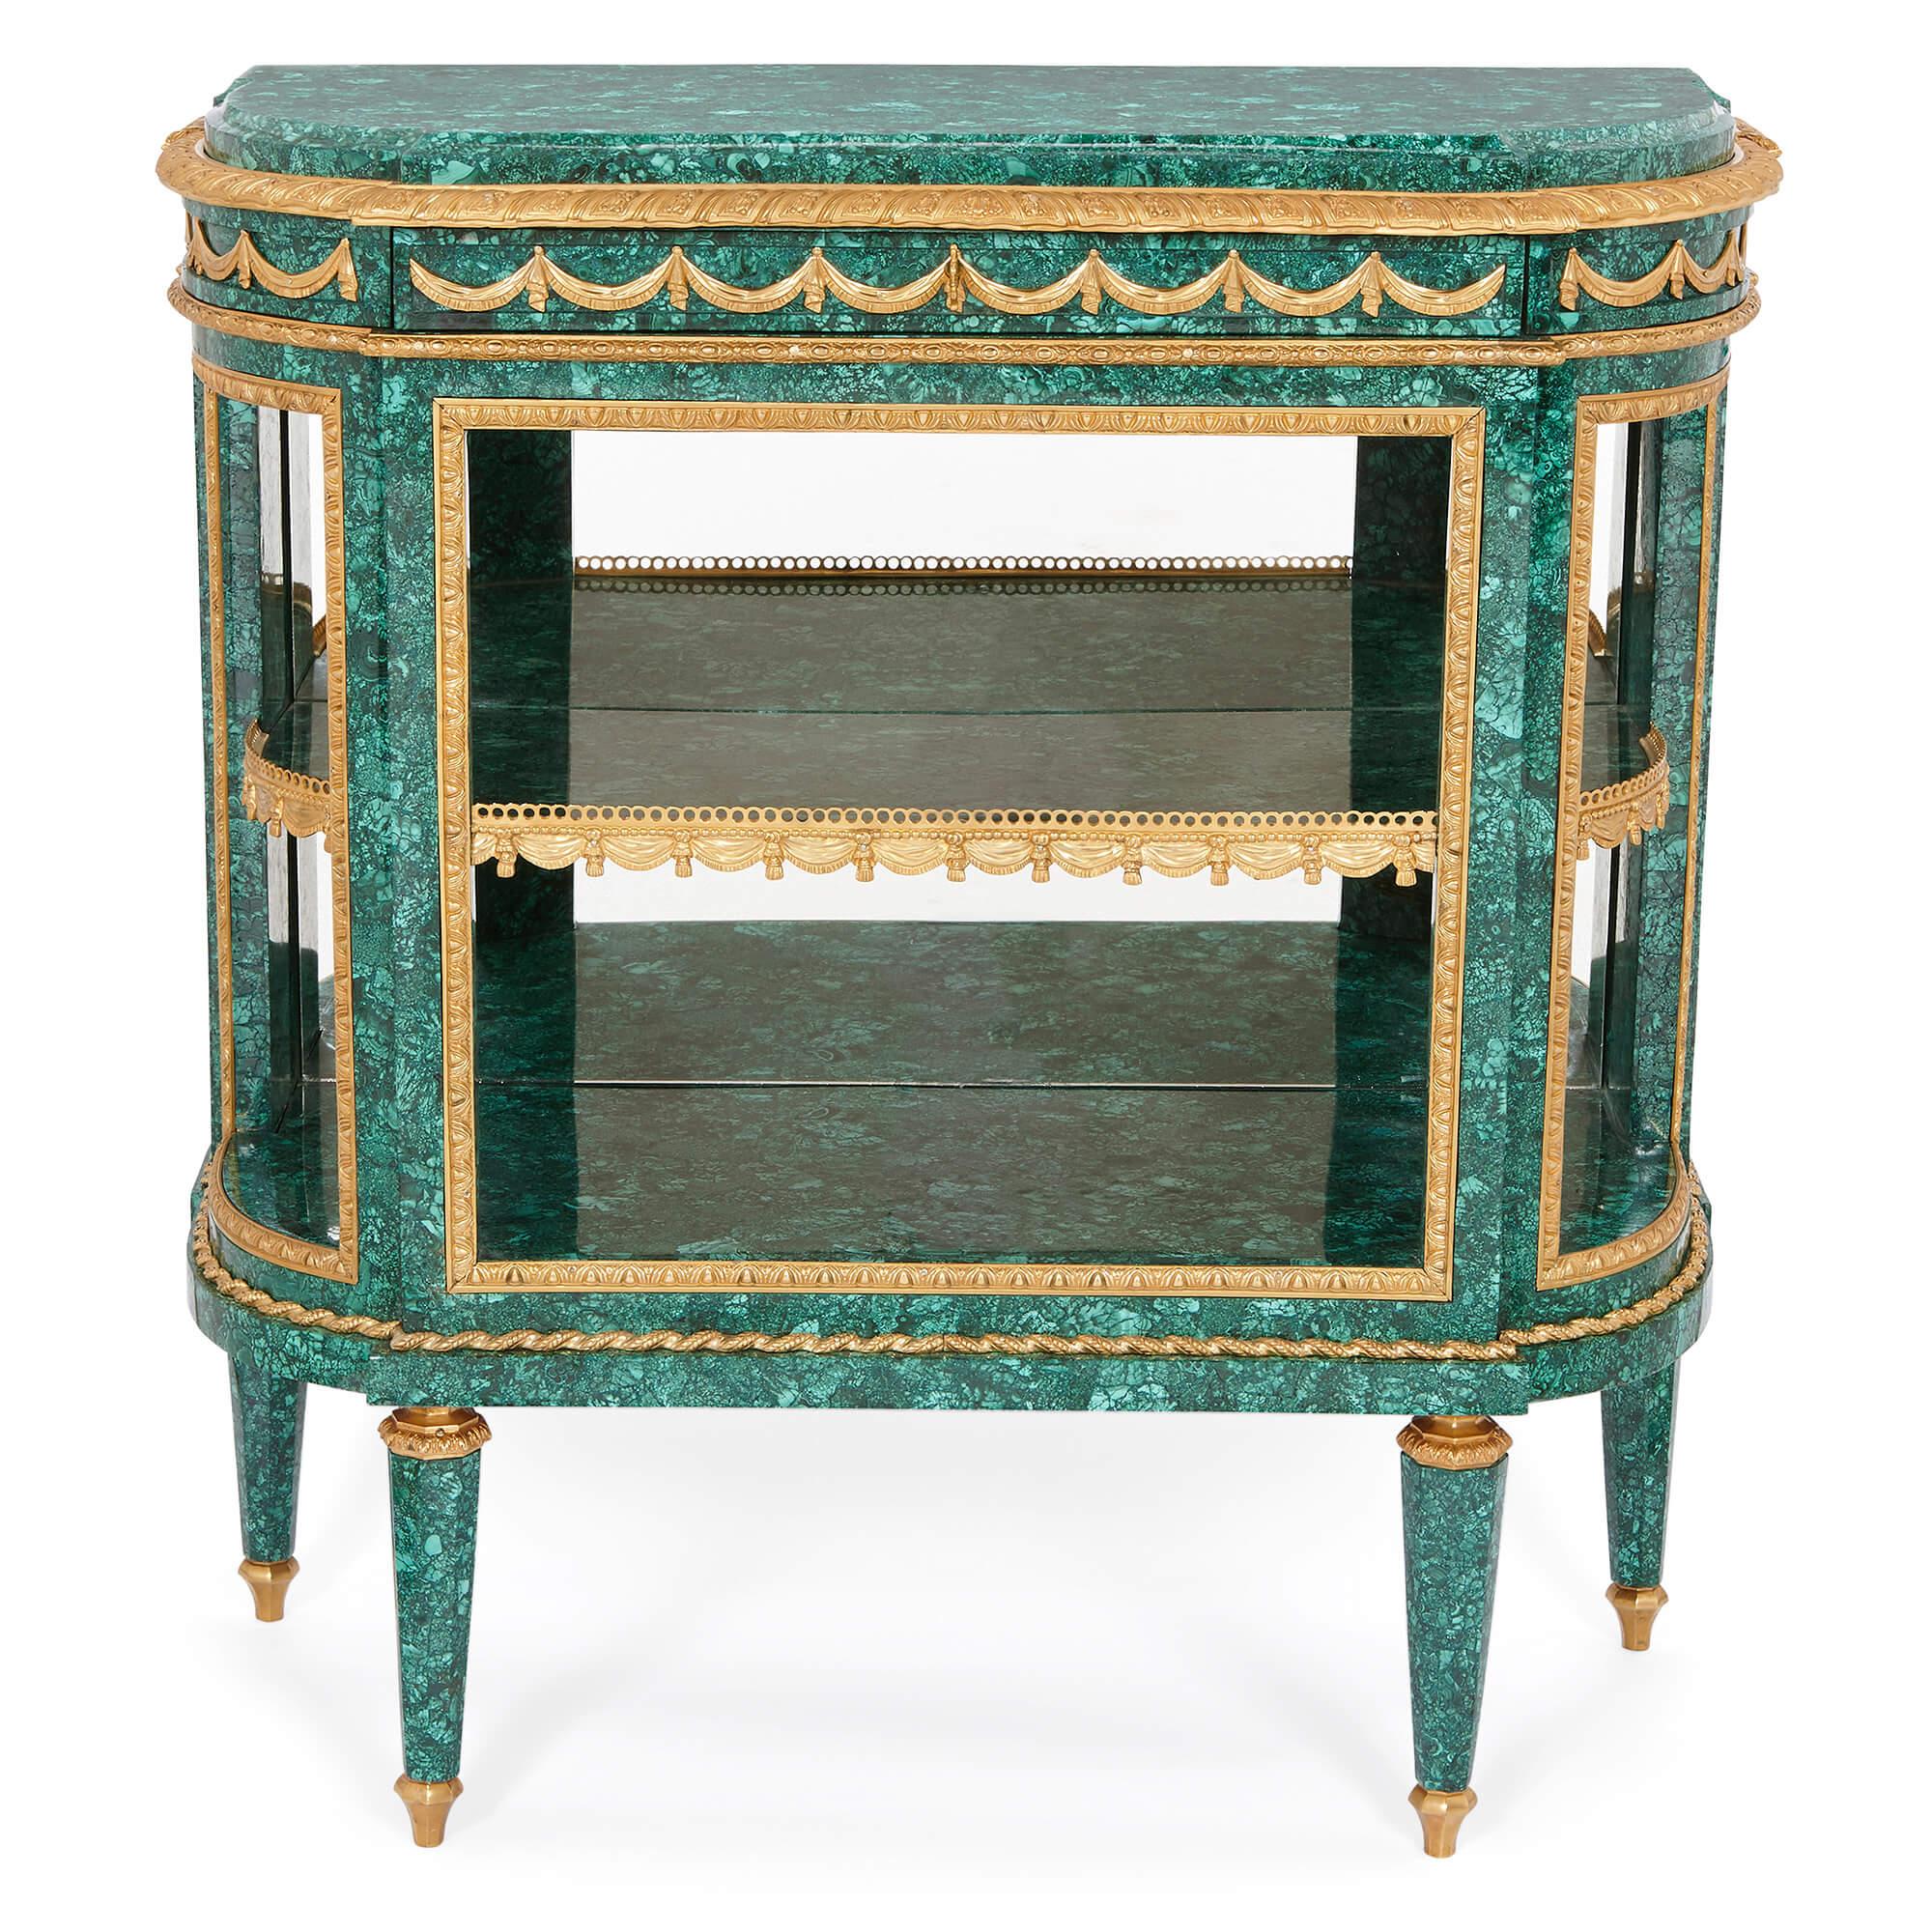 Pair of Neoclassical style malachite and gilt bronze commodes
French, 20th century
Measures: Height 87cm, width 84cm, depth 38cm

This superb pair of neoclassical style console tables is wrought from malachite, gilt bronze, and mirror—the